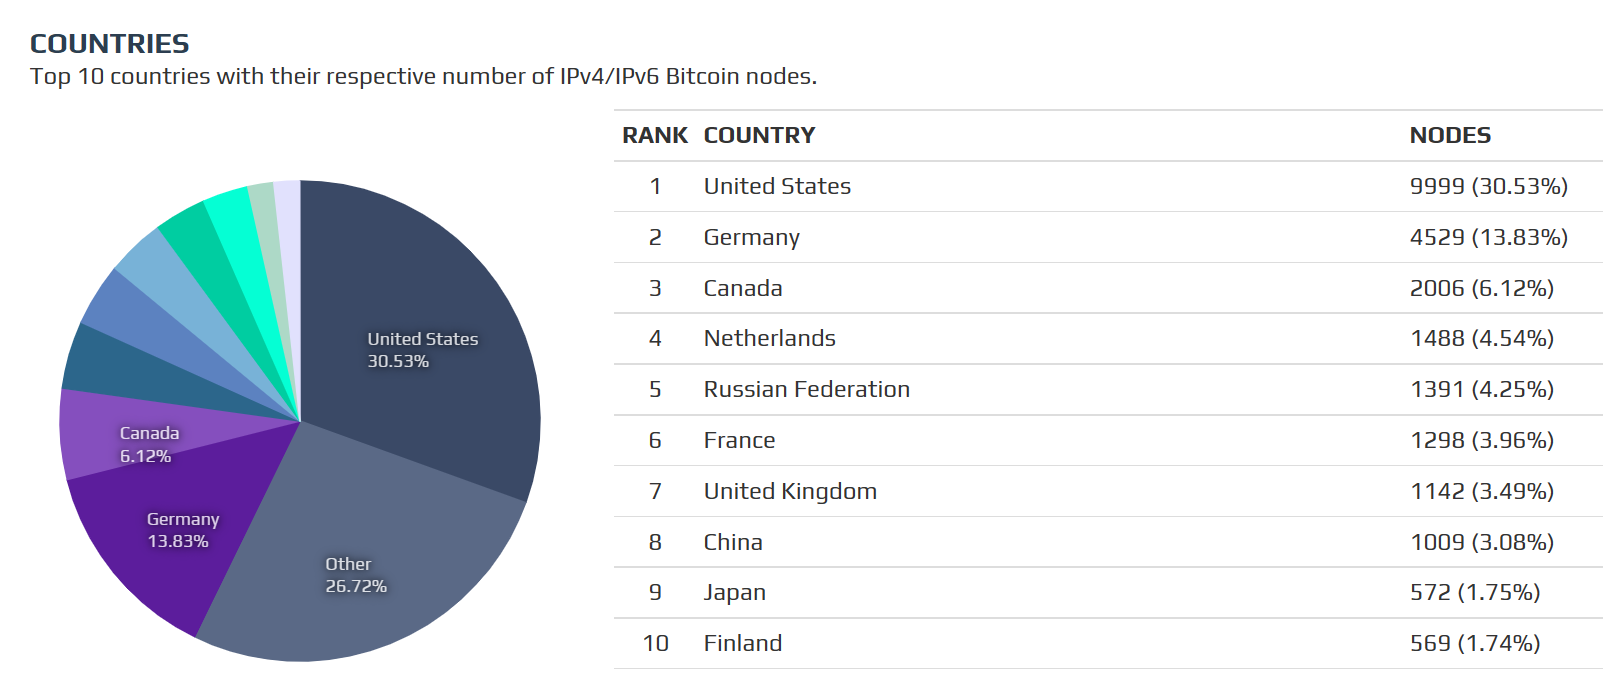 List of top 10 countries with most number of Bitcoin nodes. Source: Bitnodes